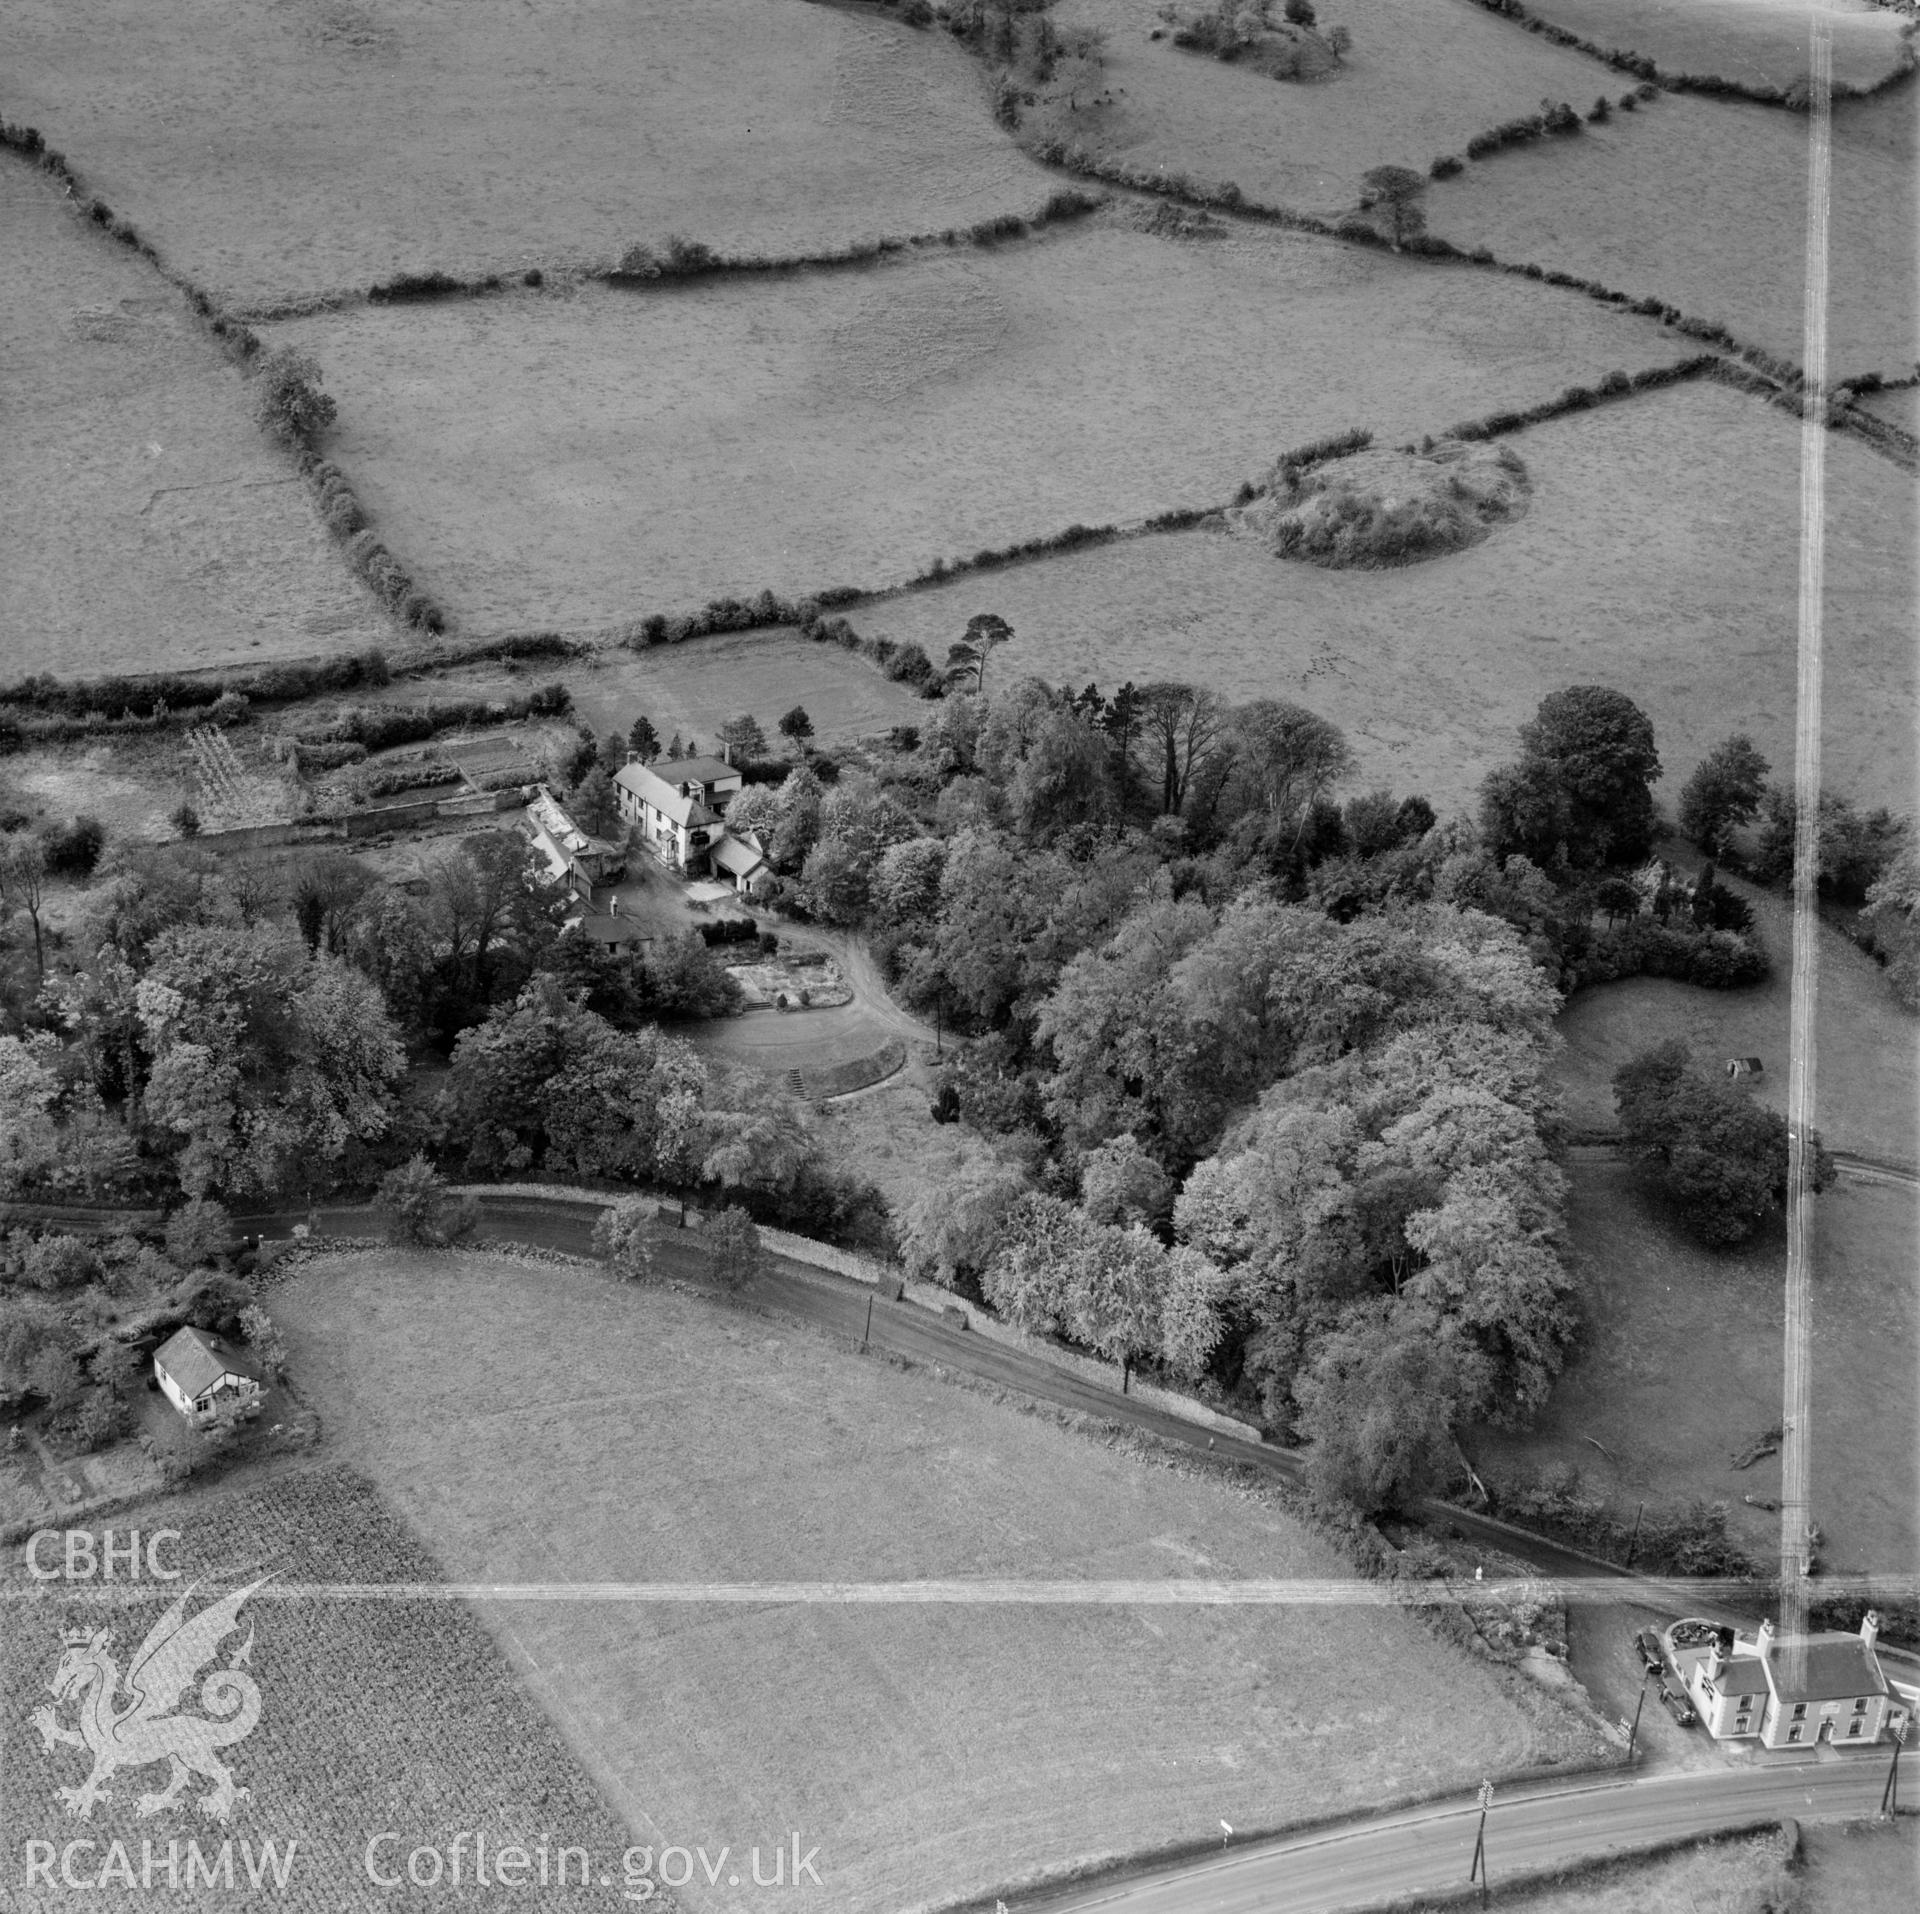 View of area south of Holywell showing Pistyll. Labelled "Holywell Textile Mills Ltd., Highfield & Pistyll".